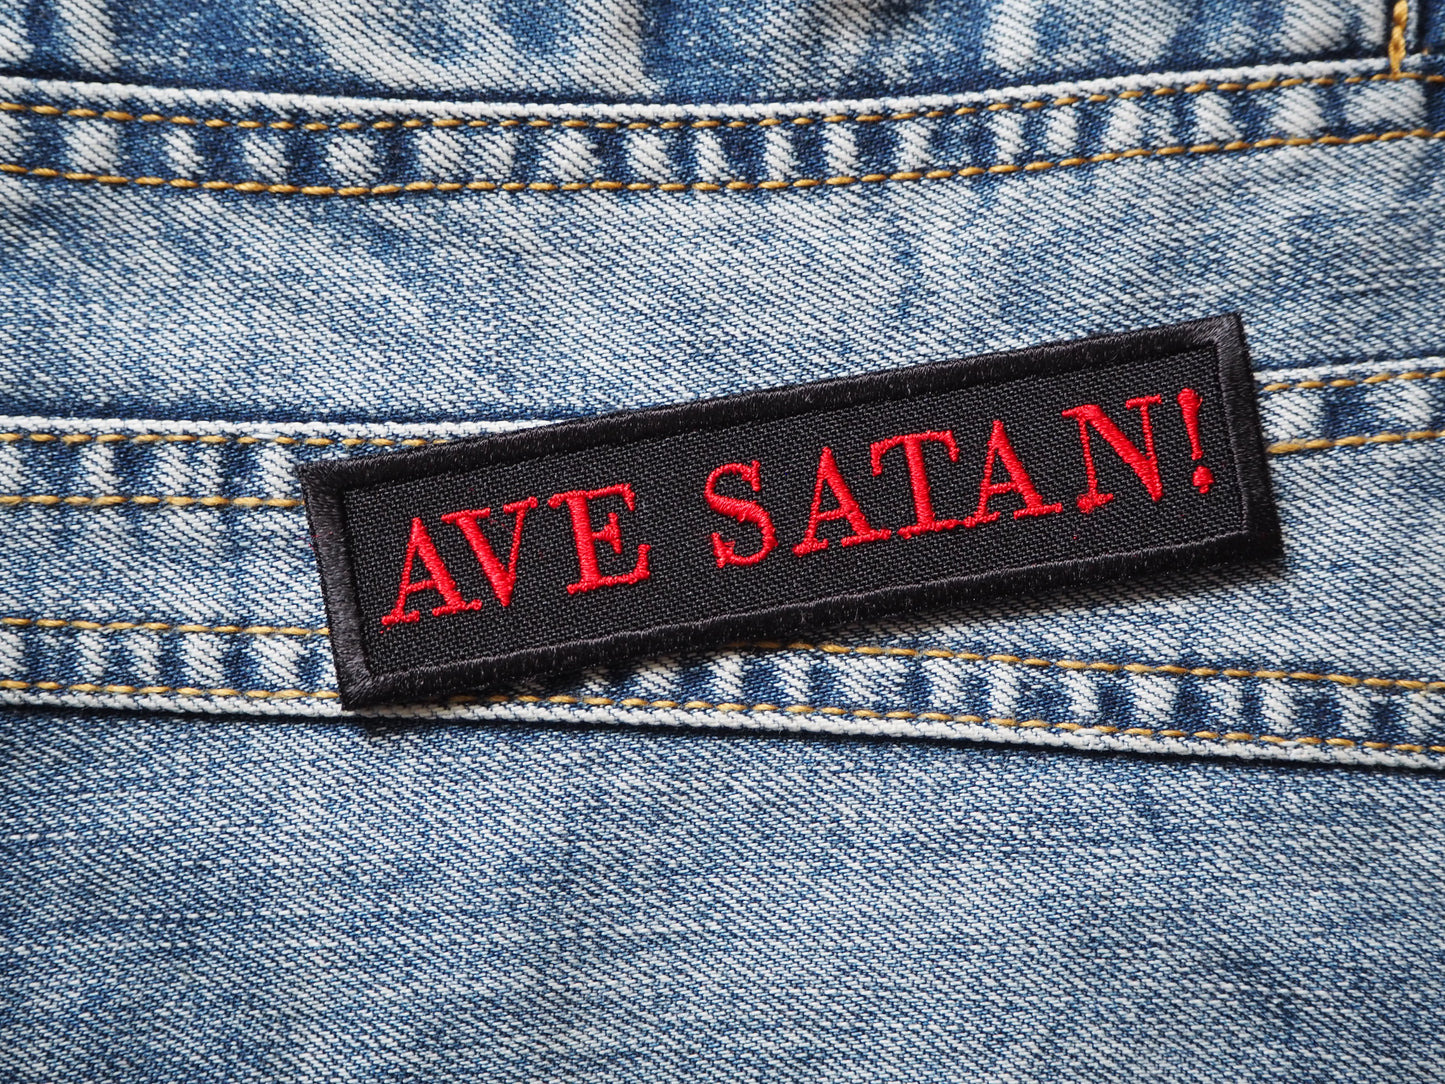 Ave Satan! Embroidered Patch